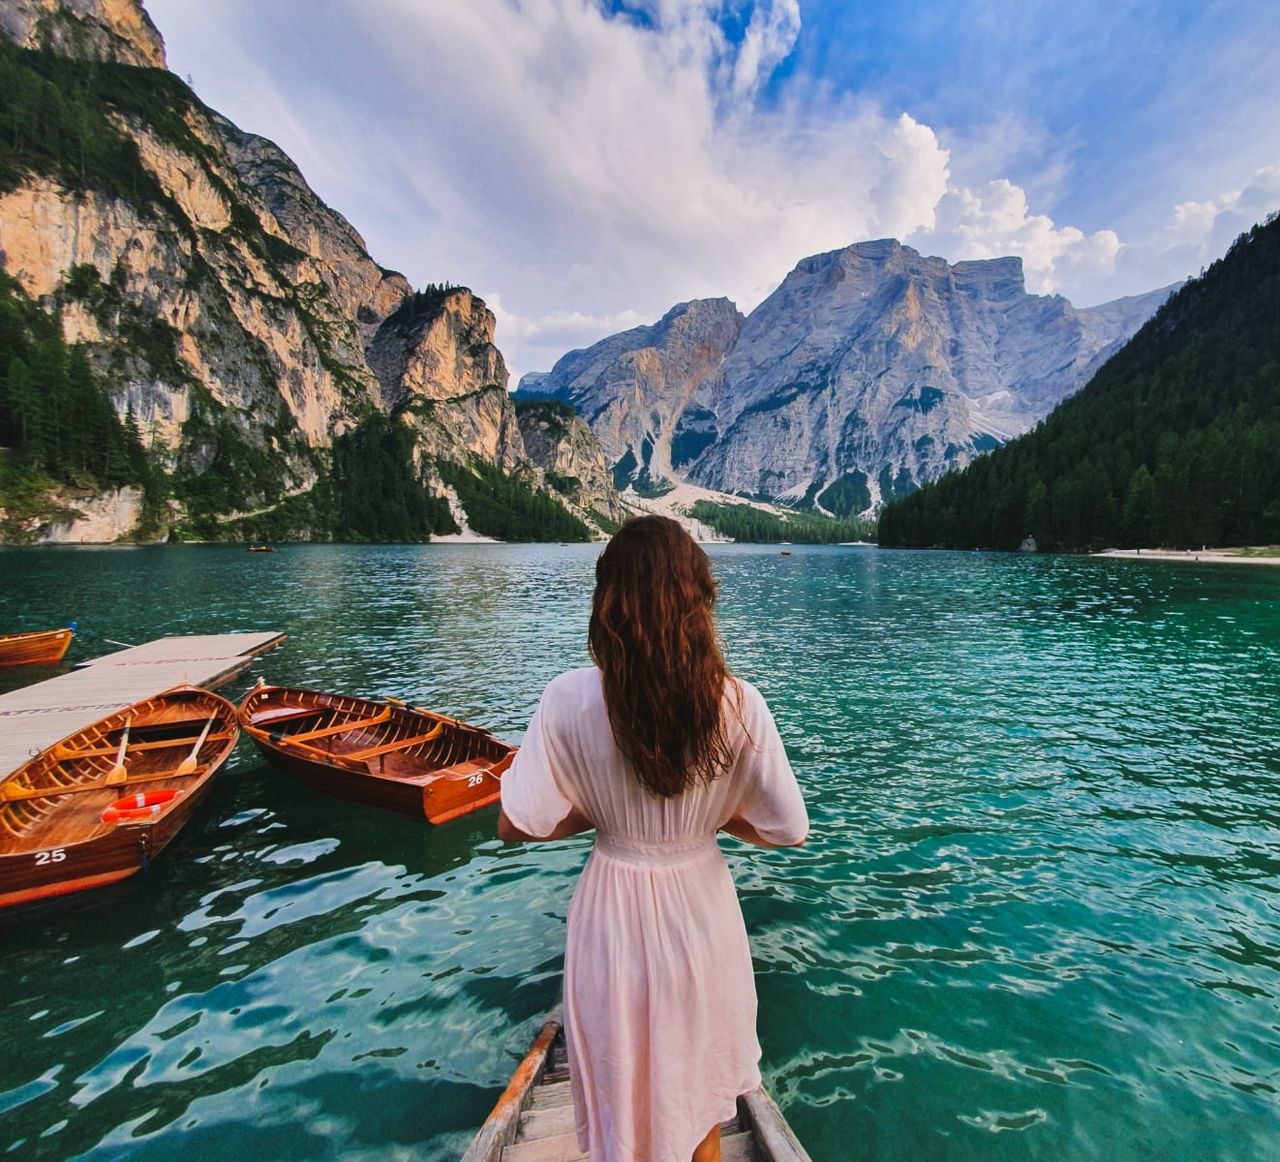 water, mountain, rear view, real people, leisure activity, beauty in nature, one person, lifestyles, scenics - nature, sky, women, mountain range, adult, nature, nautical vessel, tranquil scene, three quarter length, transportation, standing, hairstyle, outdoors